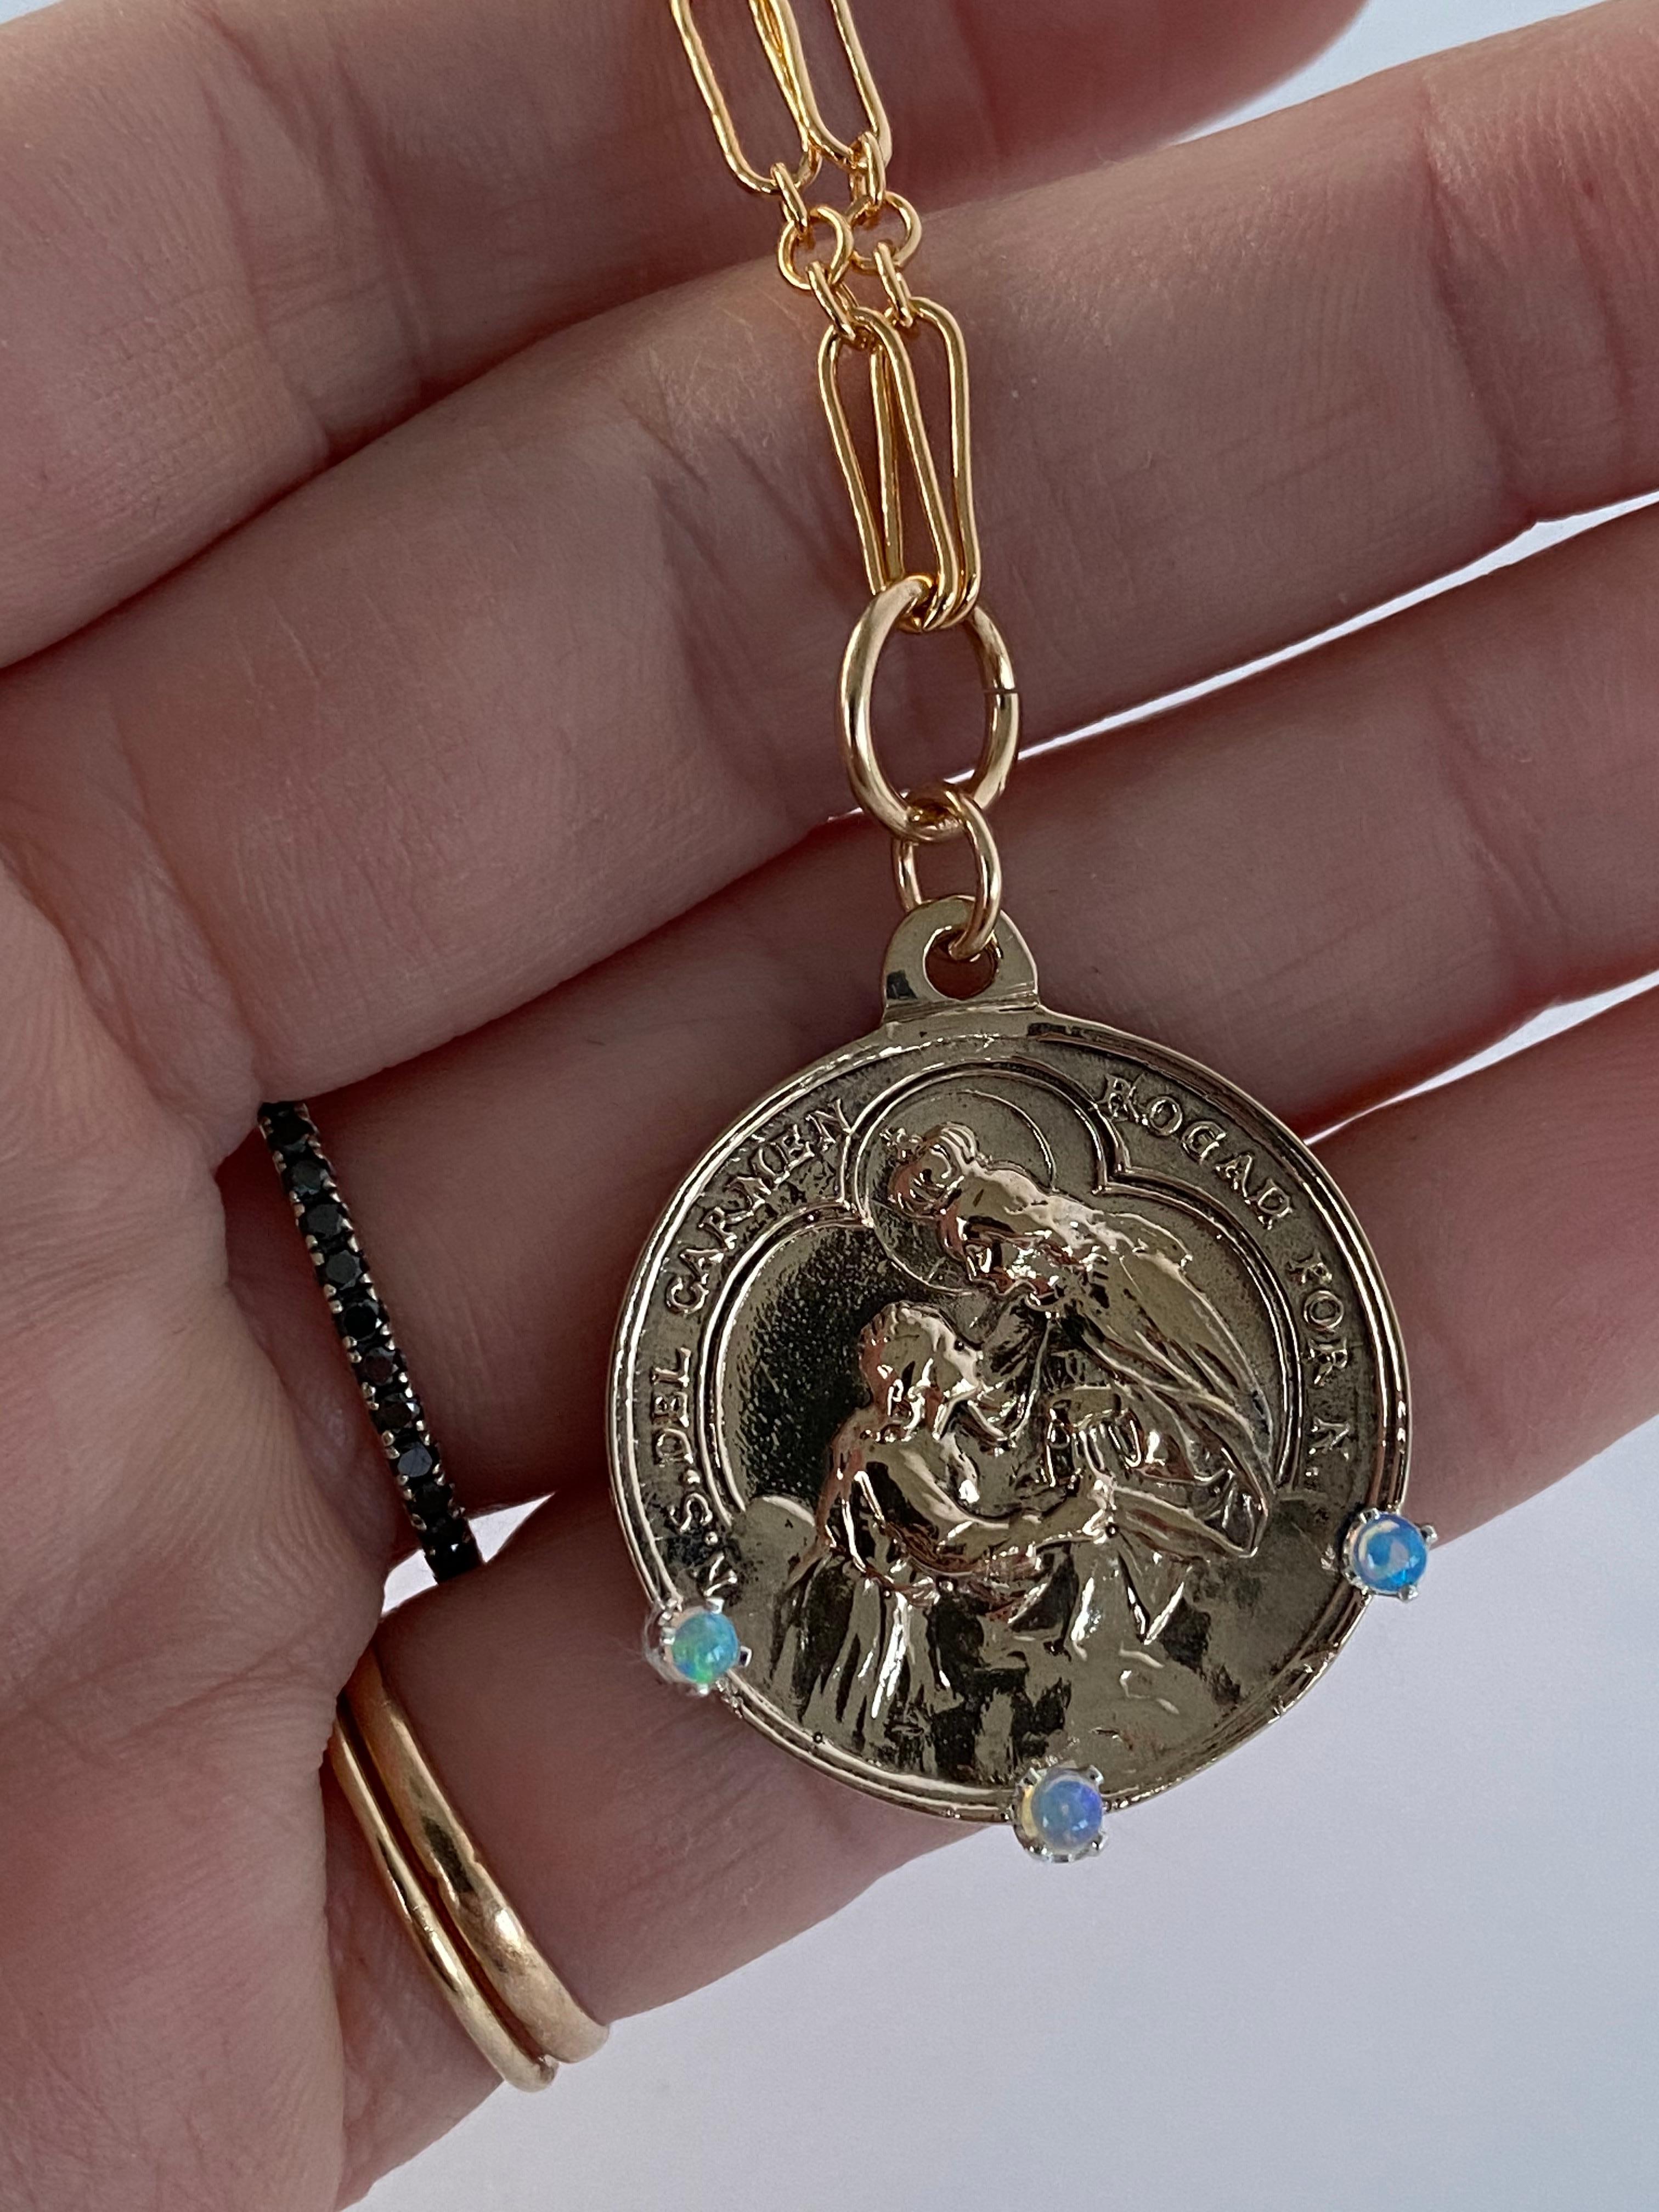 Virgin Mary Medal Chain Necklace Opal Pendant J Dauphin For Sale 5